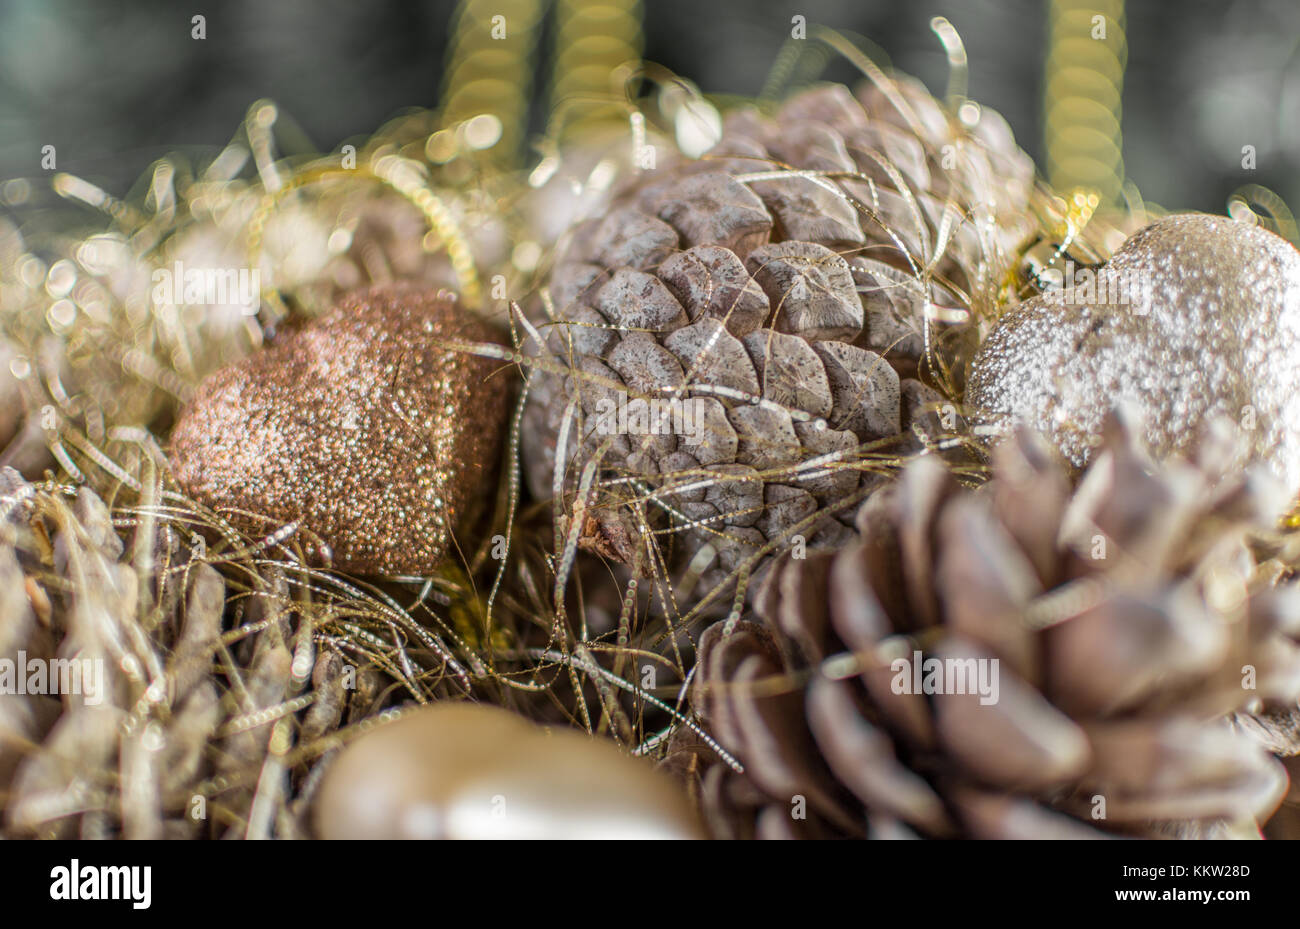 Colorful golden Christmas decorations of a wooden basket with pine cones made with desaturated grainy effect. Extreme shallow depth of field and color Stock Photo